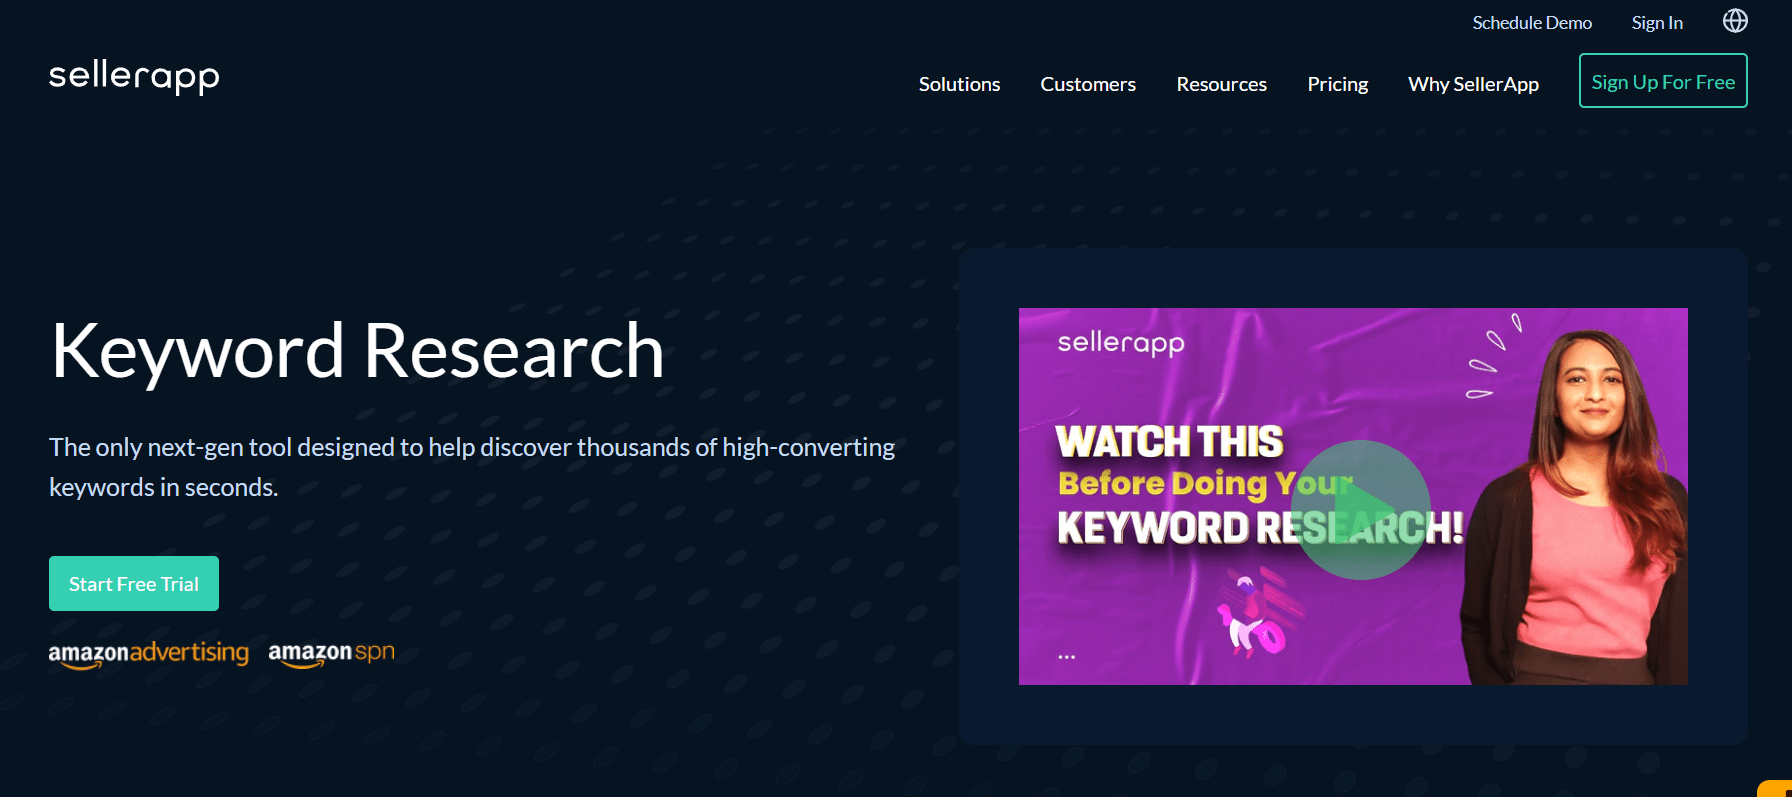 Major Features and Benefits of SellerApp Keyword Research